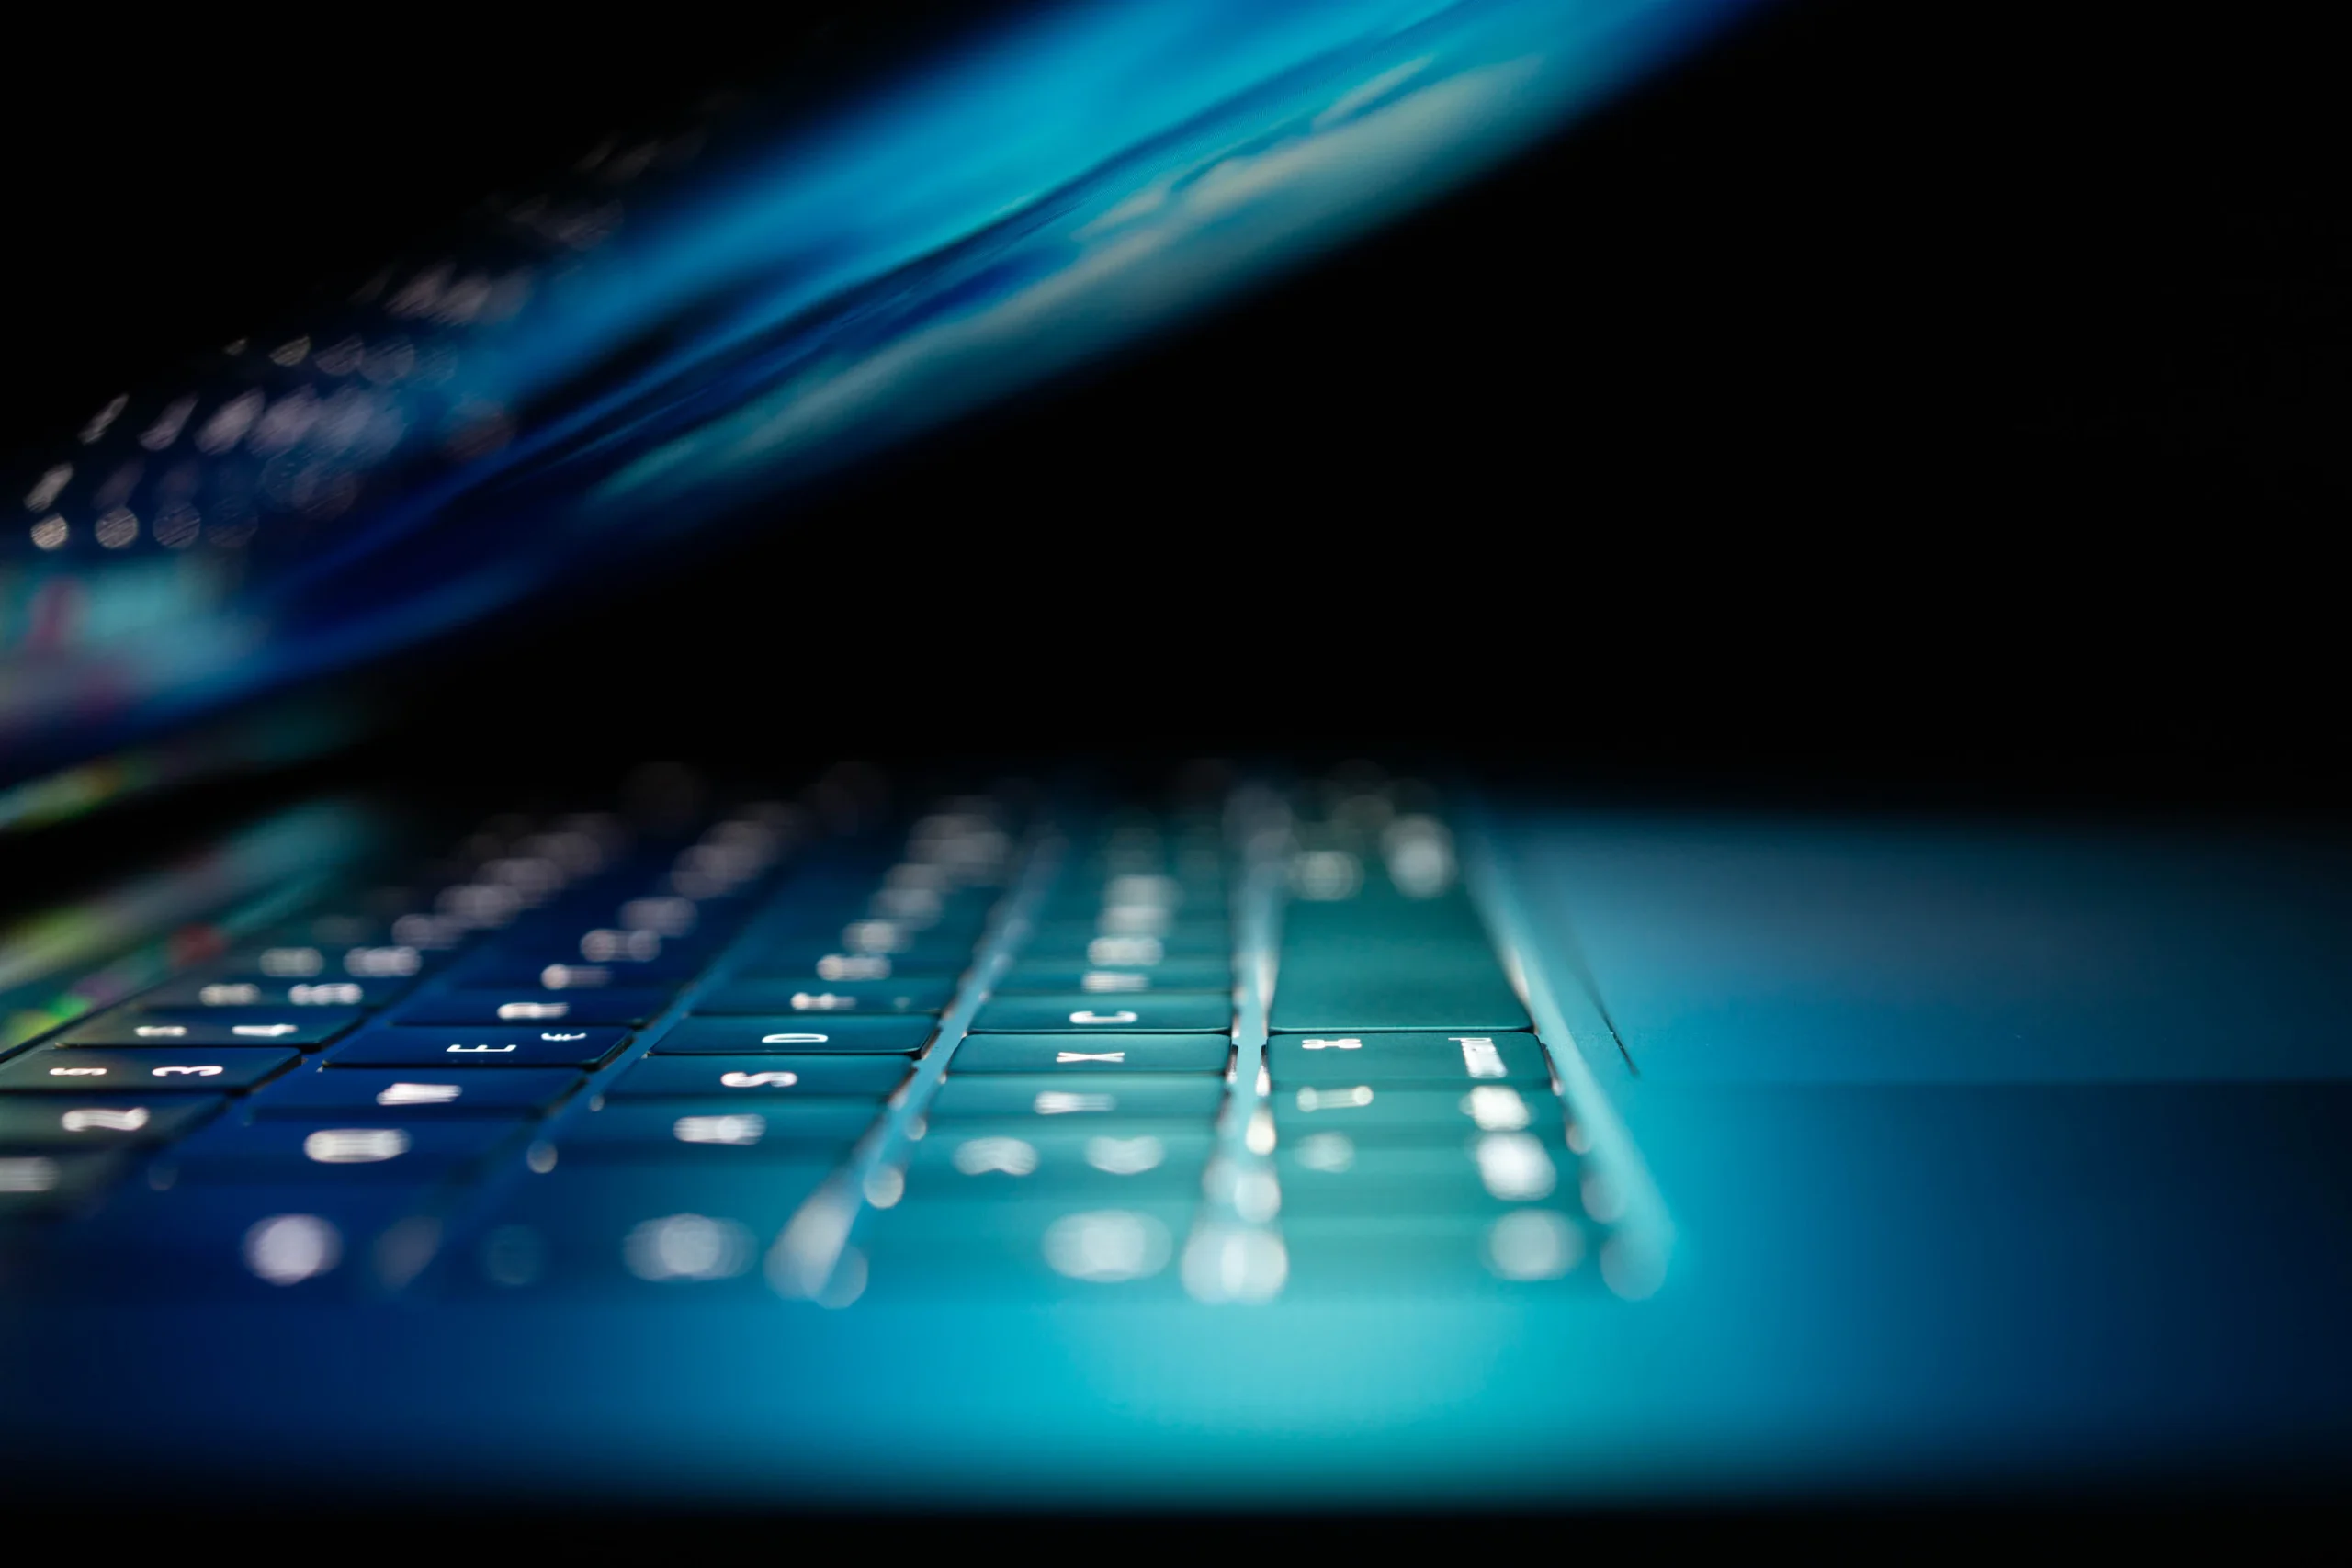 A lit up Mac laptop with keyboard shown in the close up. Blue light shines from the screen onto the keyboard.